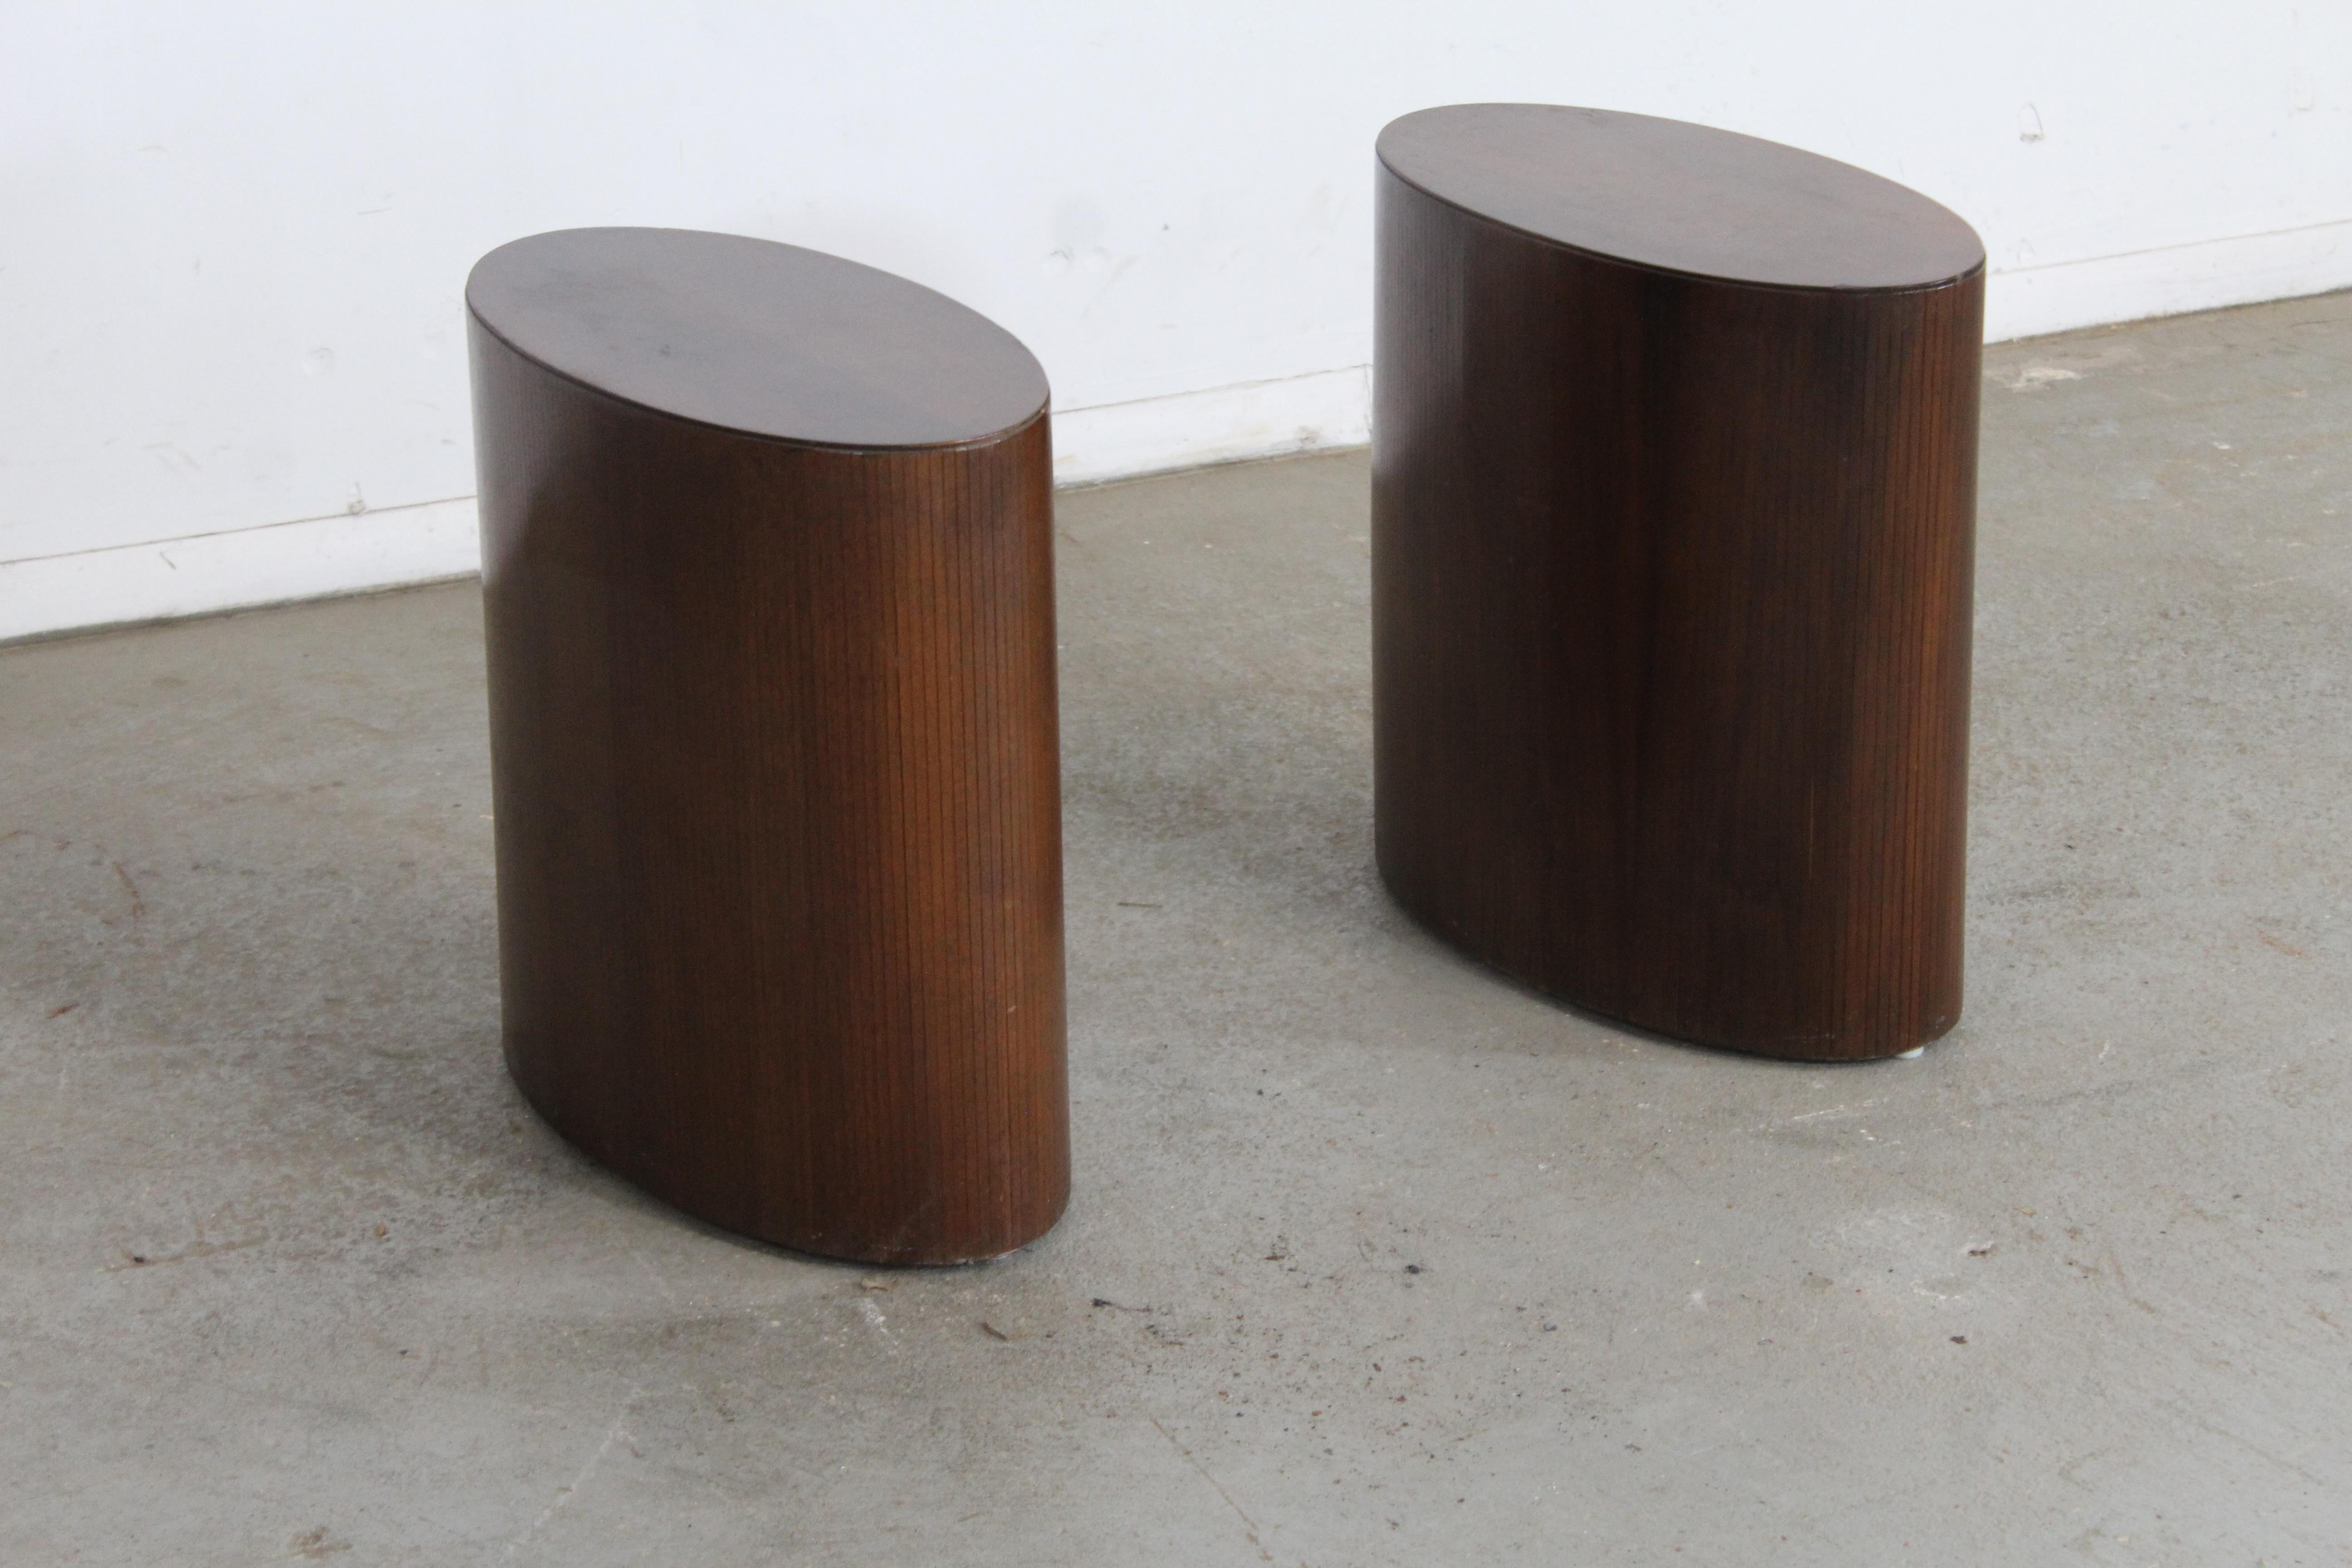 Pair of Mid-Century Modern Oval Walnut Pedestal/Stands/End Table by Lane For Sale 9